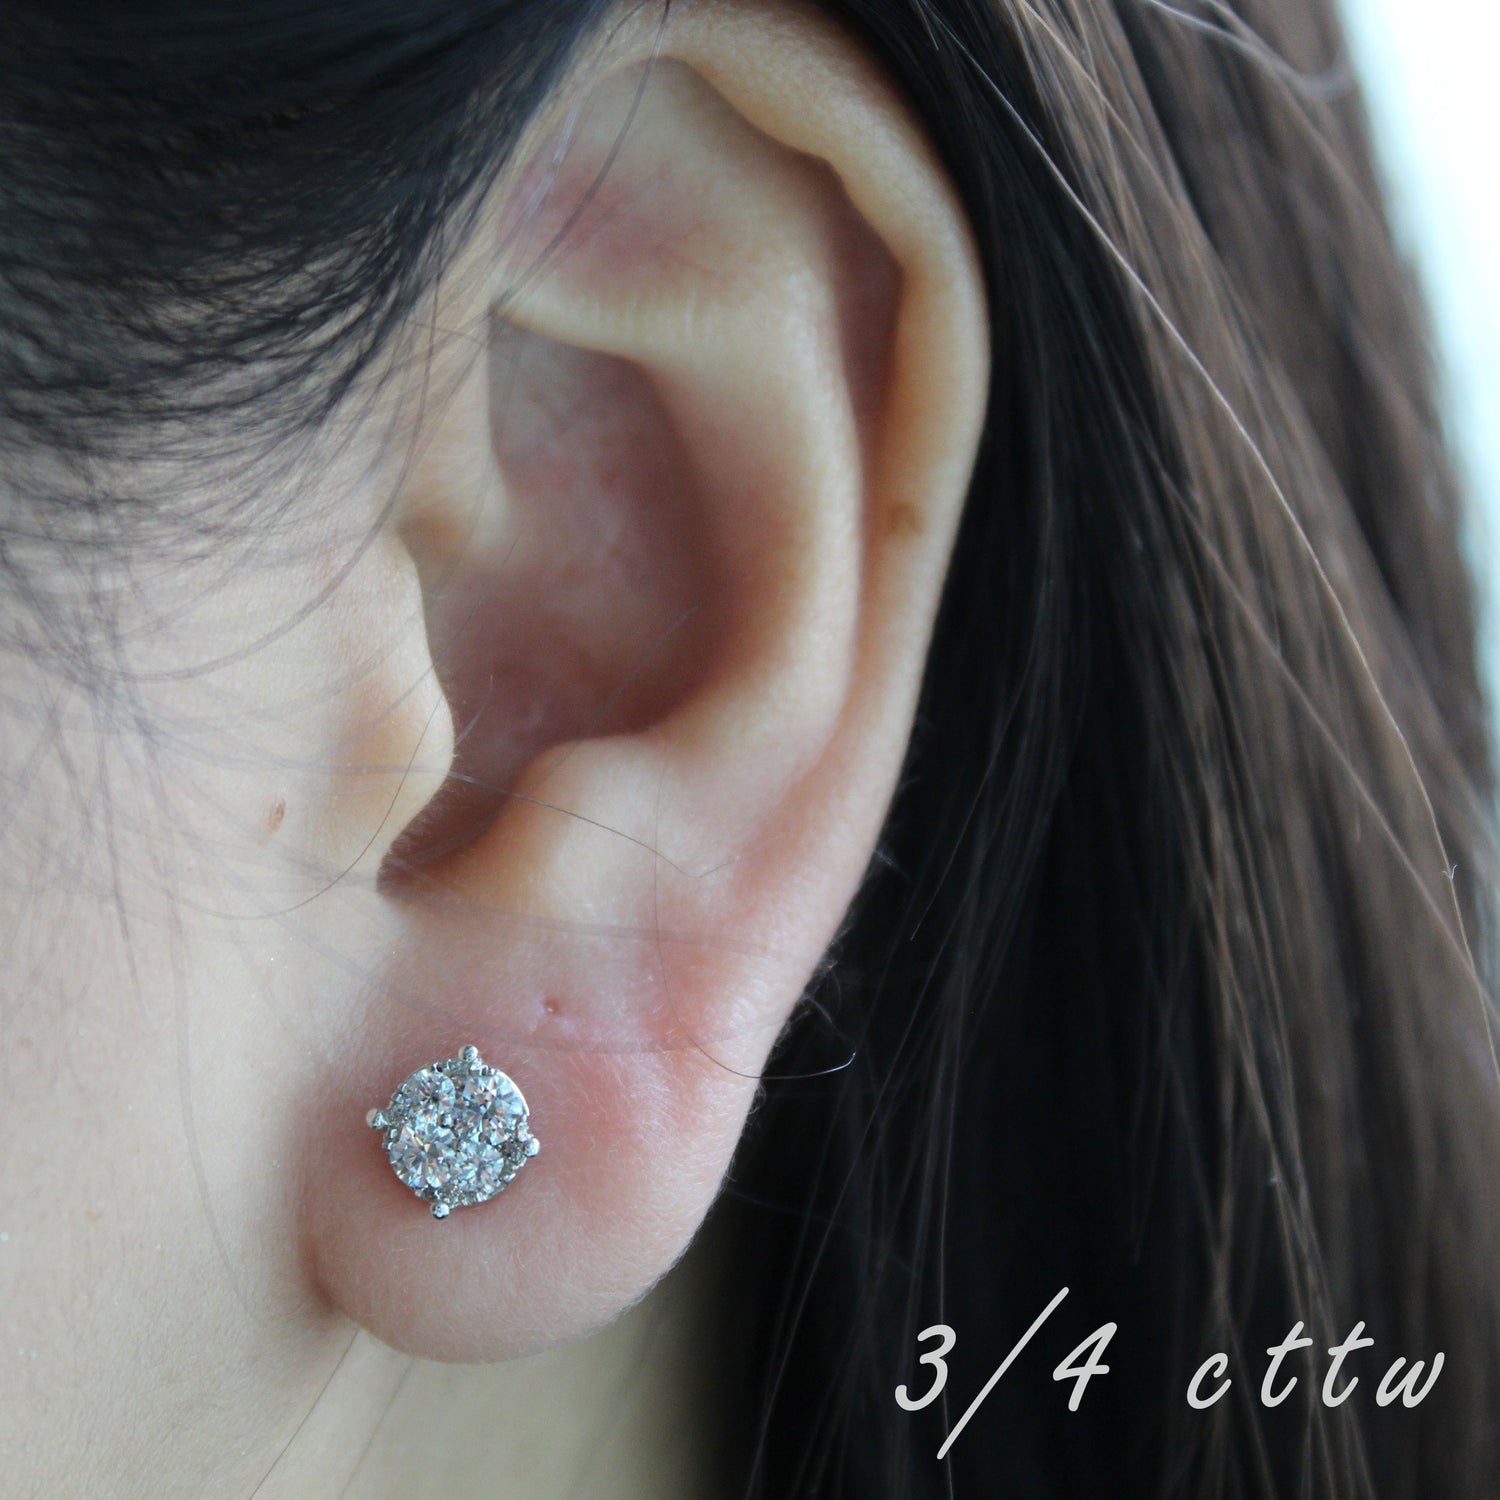 LAB GROWN 1/4 - 1 Cttw Diamond Round Grand Cluster Stud Earrings jewelry